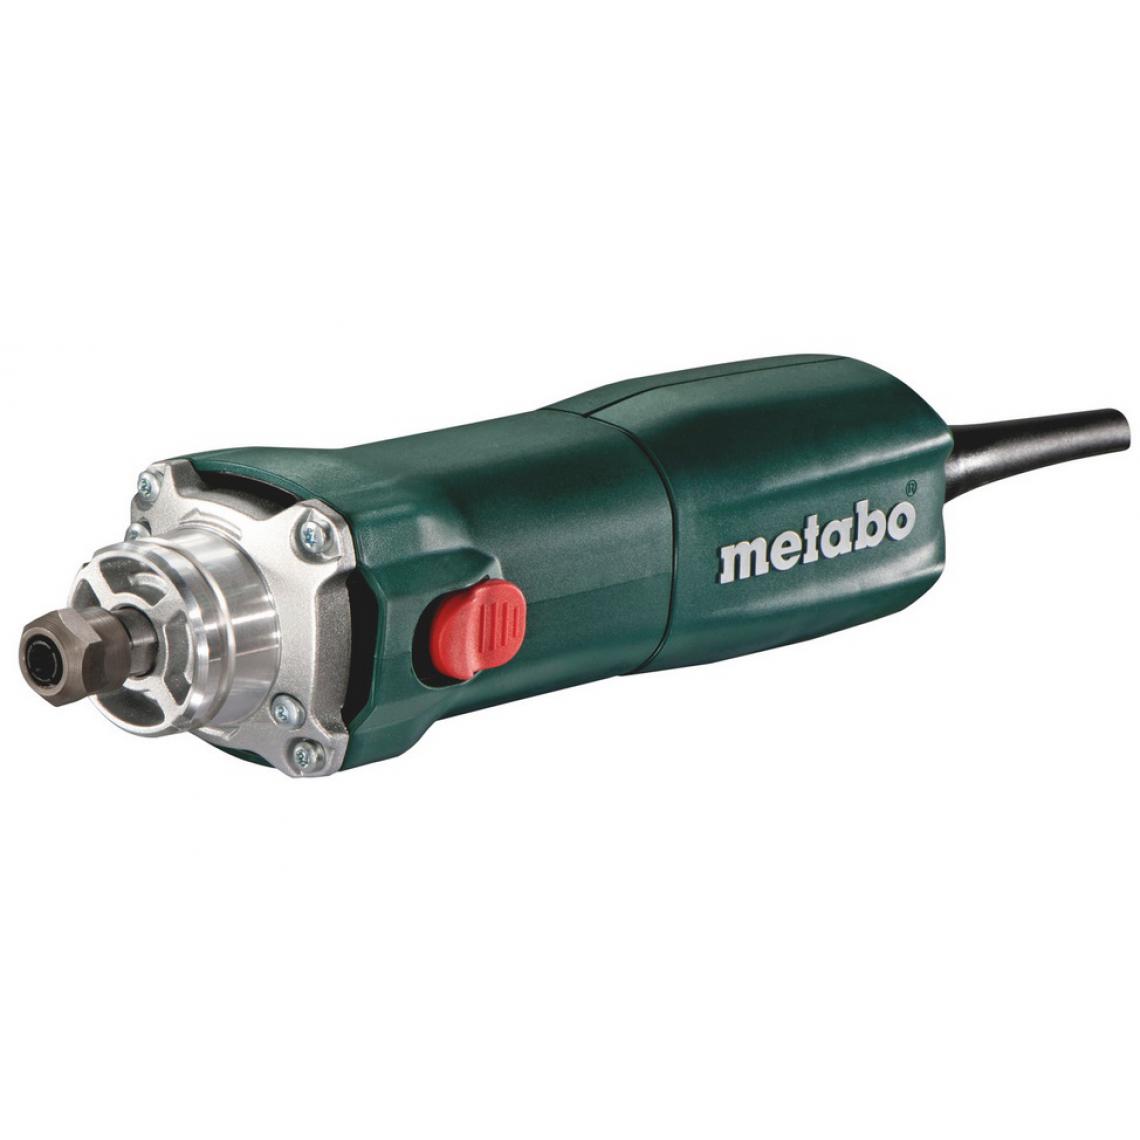 Metabo - Metabo - Meuleuse droite 710W 43mm - GE 710 Compact - Meuleuses